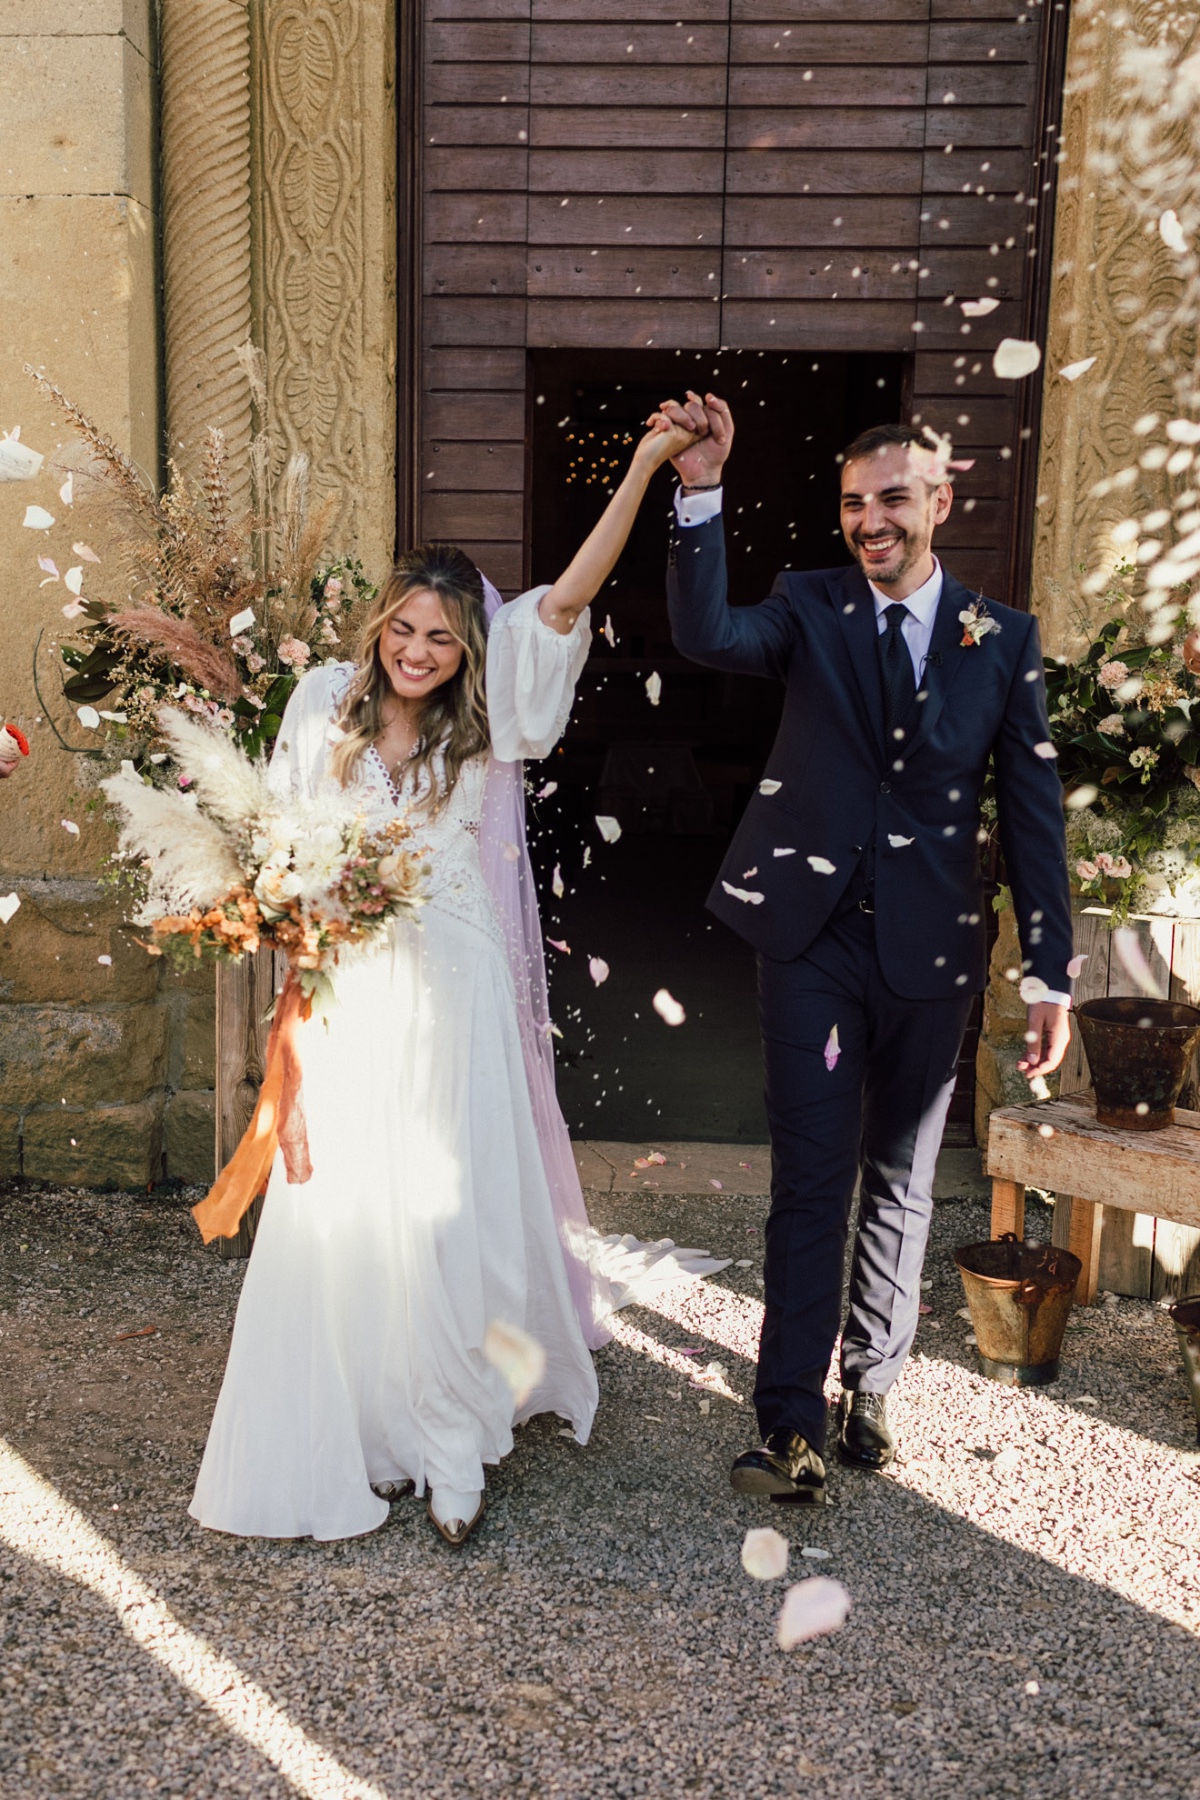 This Bride's Copper Toe Boots Steal The Show